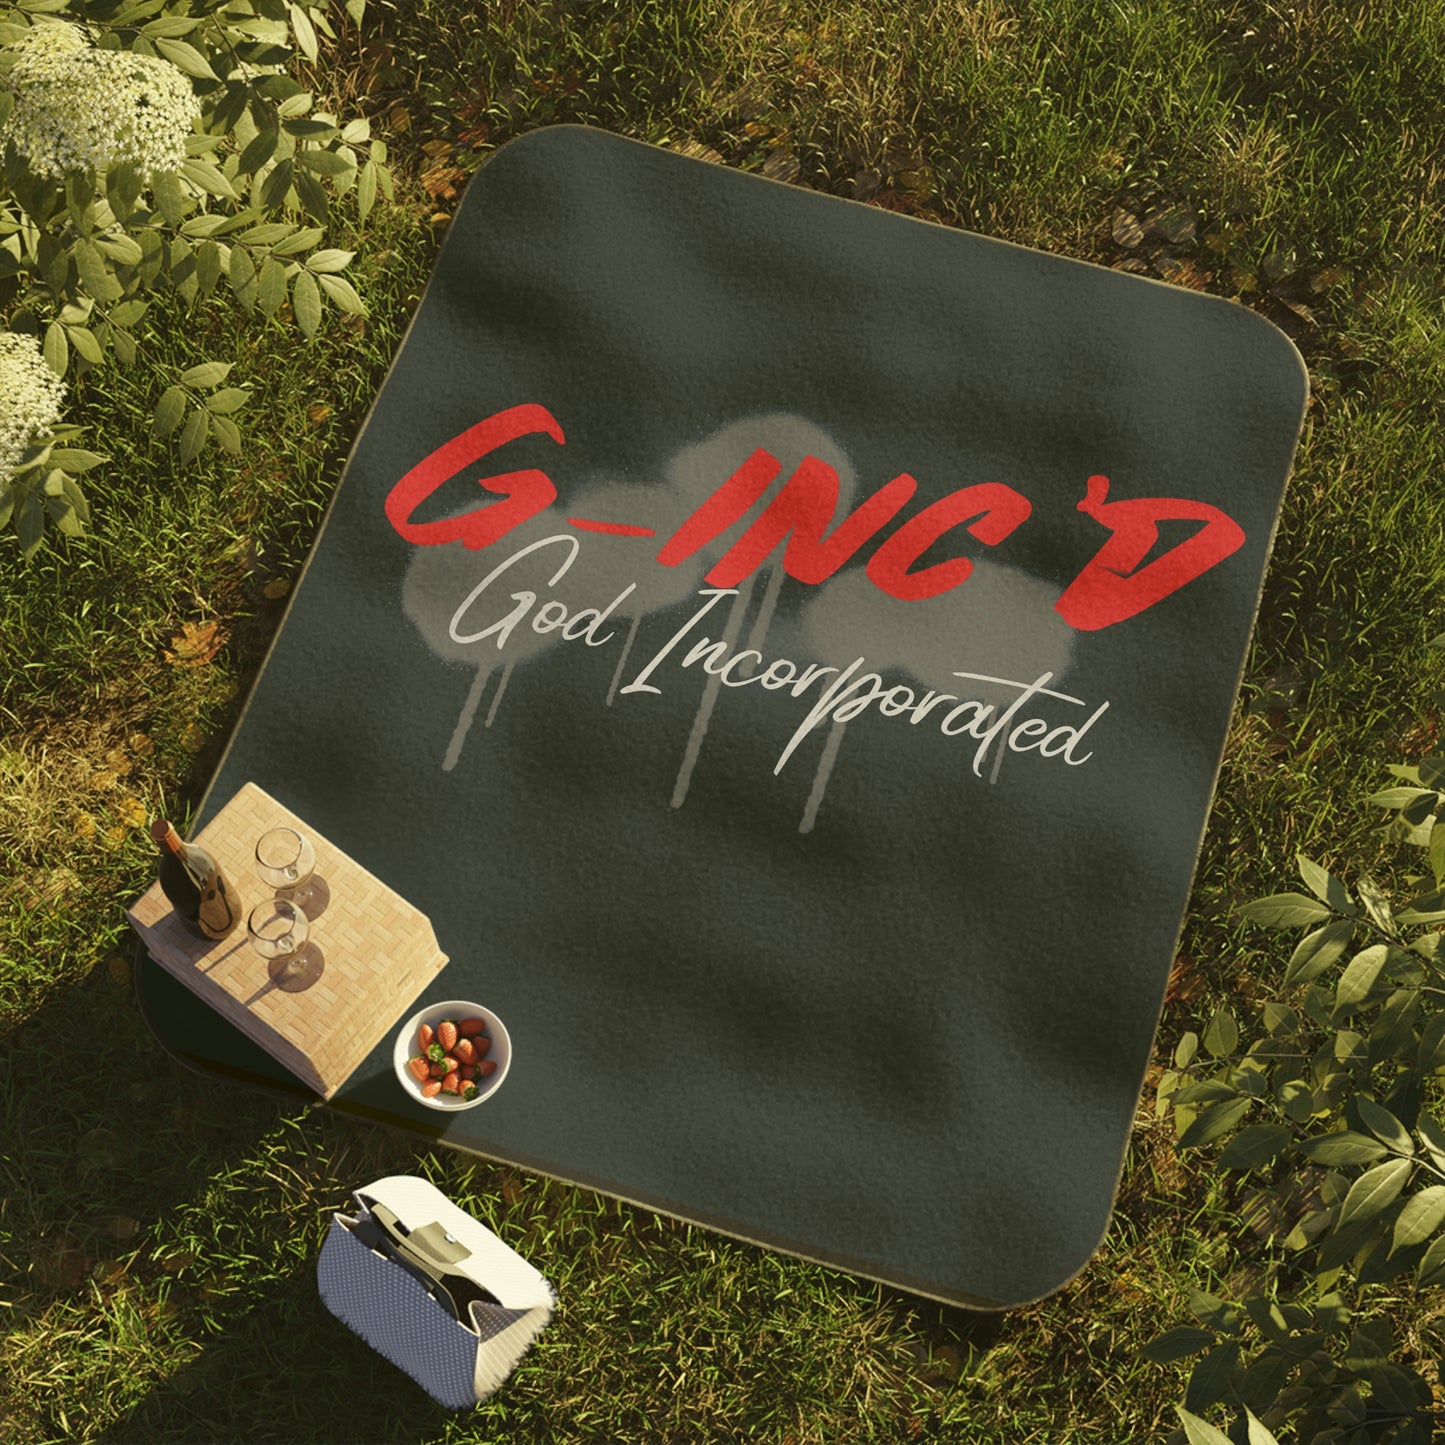 The G- Inc'd Picnic Blanket Red